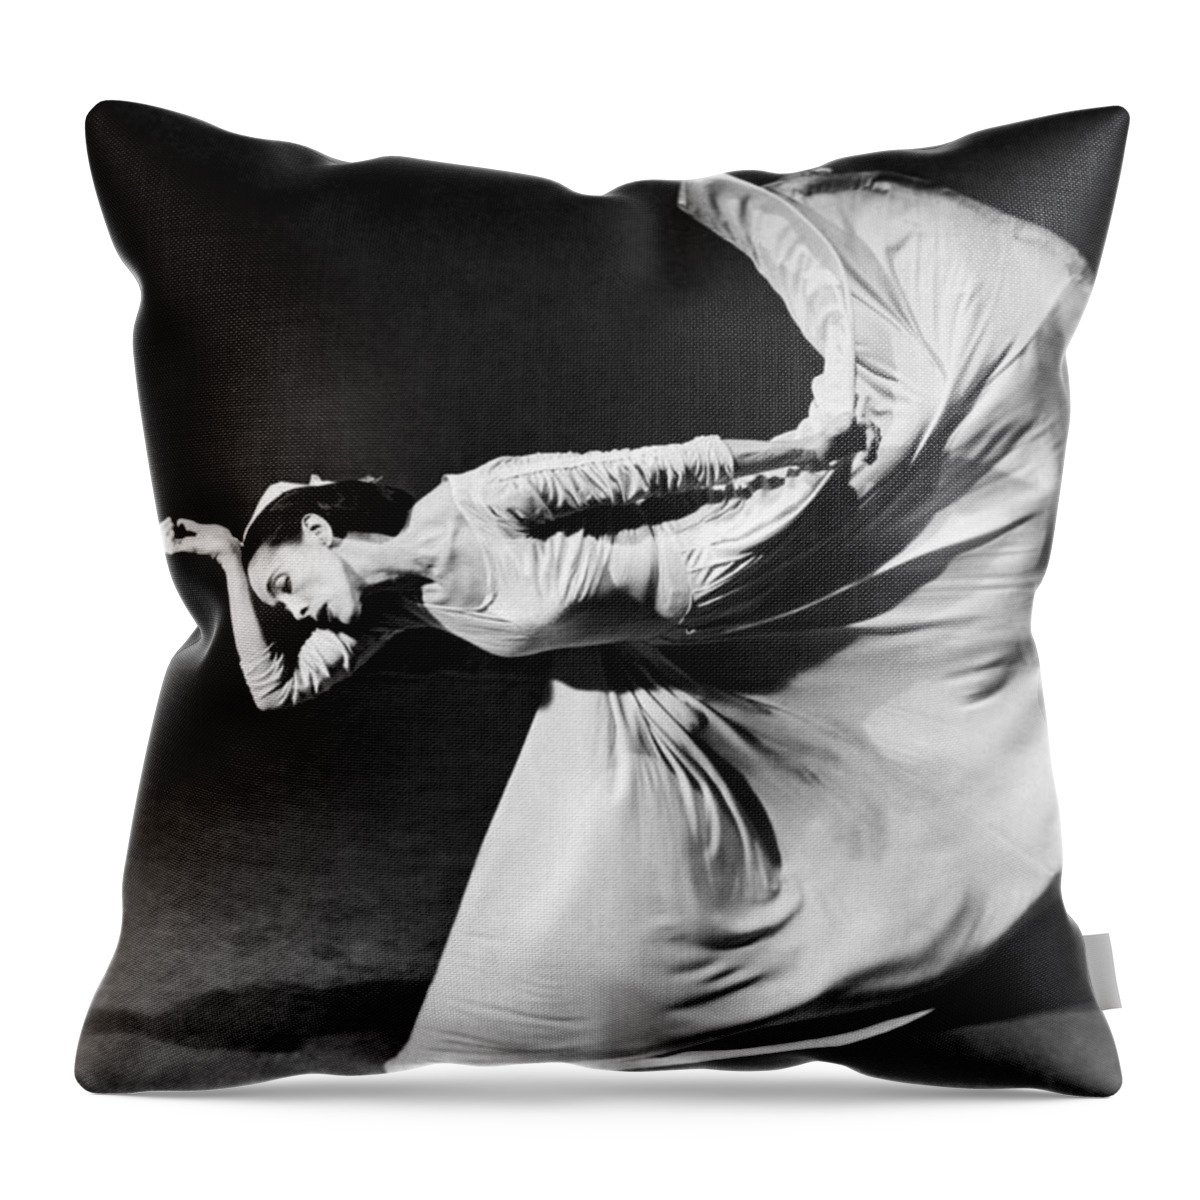 1 Person Throw Pillow featuring the photograph Dancer Martha Graham by Underwood Archives